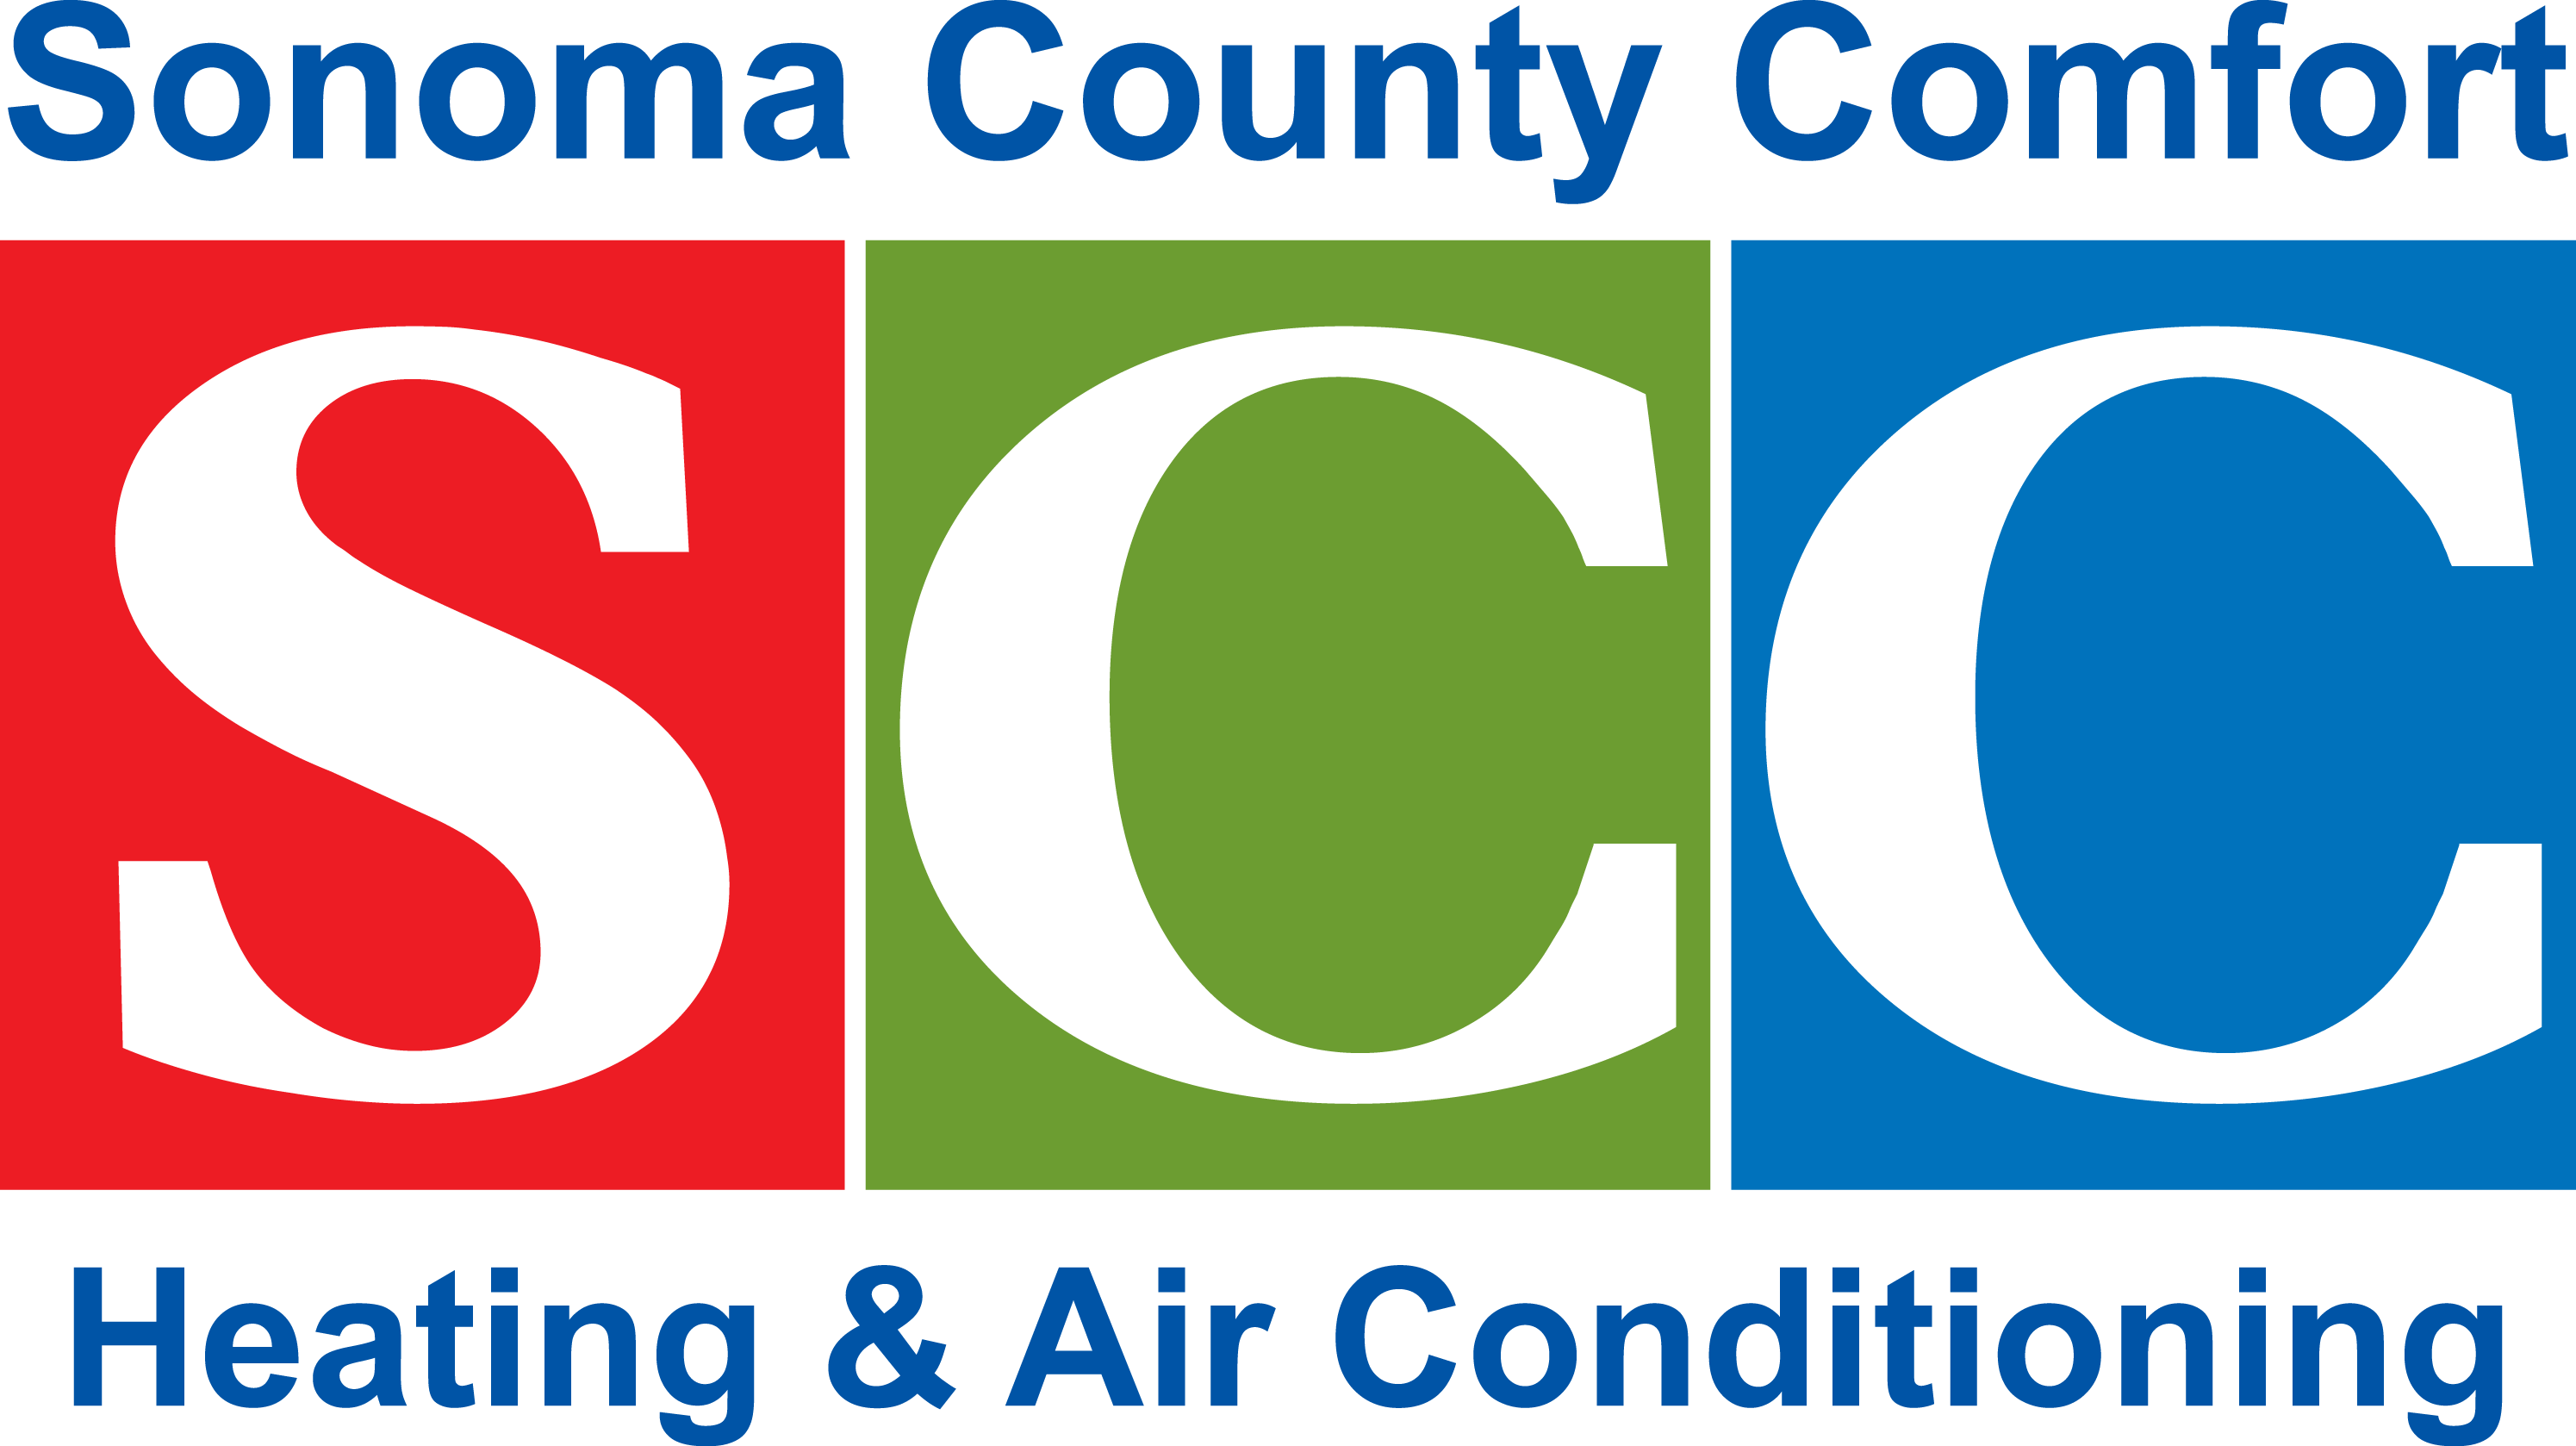 Sonoma County Comfort Heating & Air